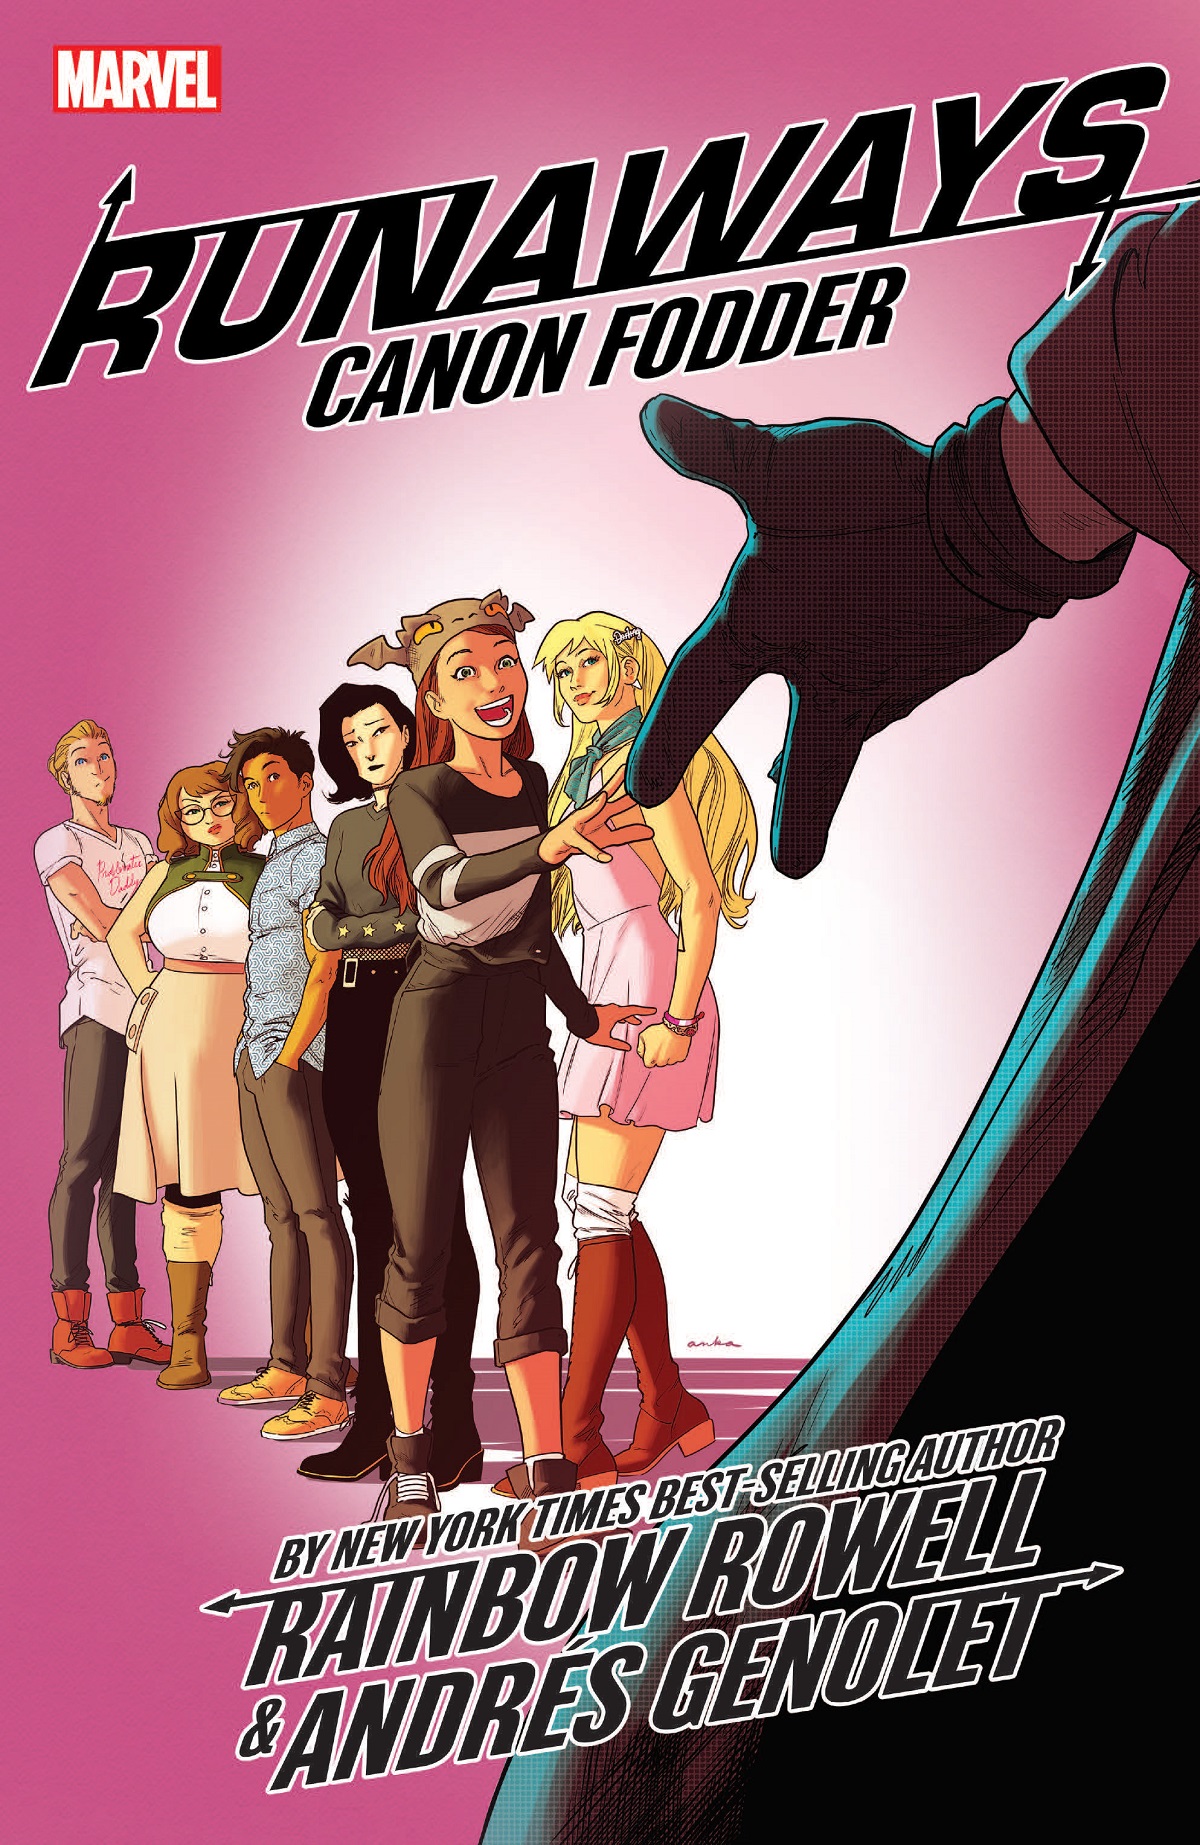 Runaways by Rainbow Rowell Vol. 5: Cannon Fodder (Trade Paperback)